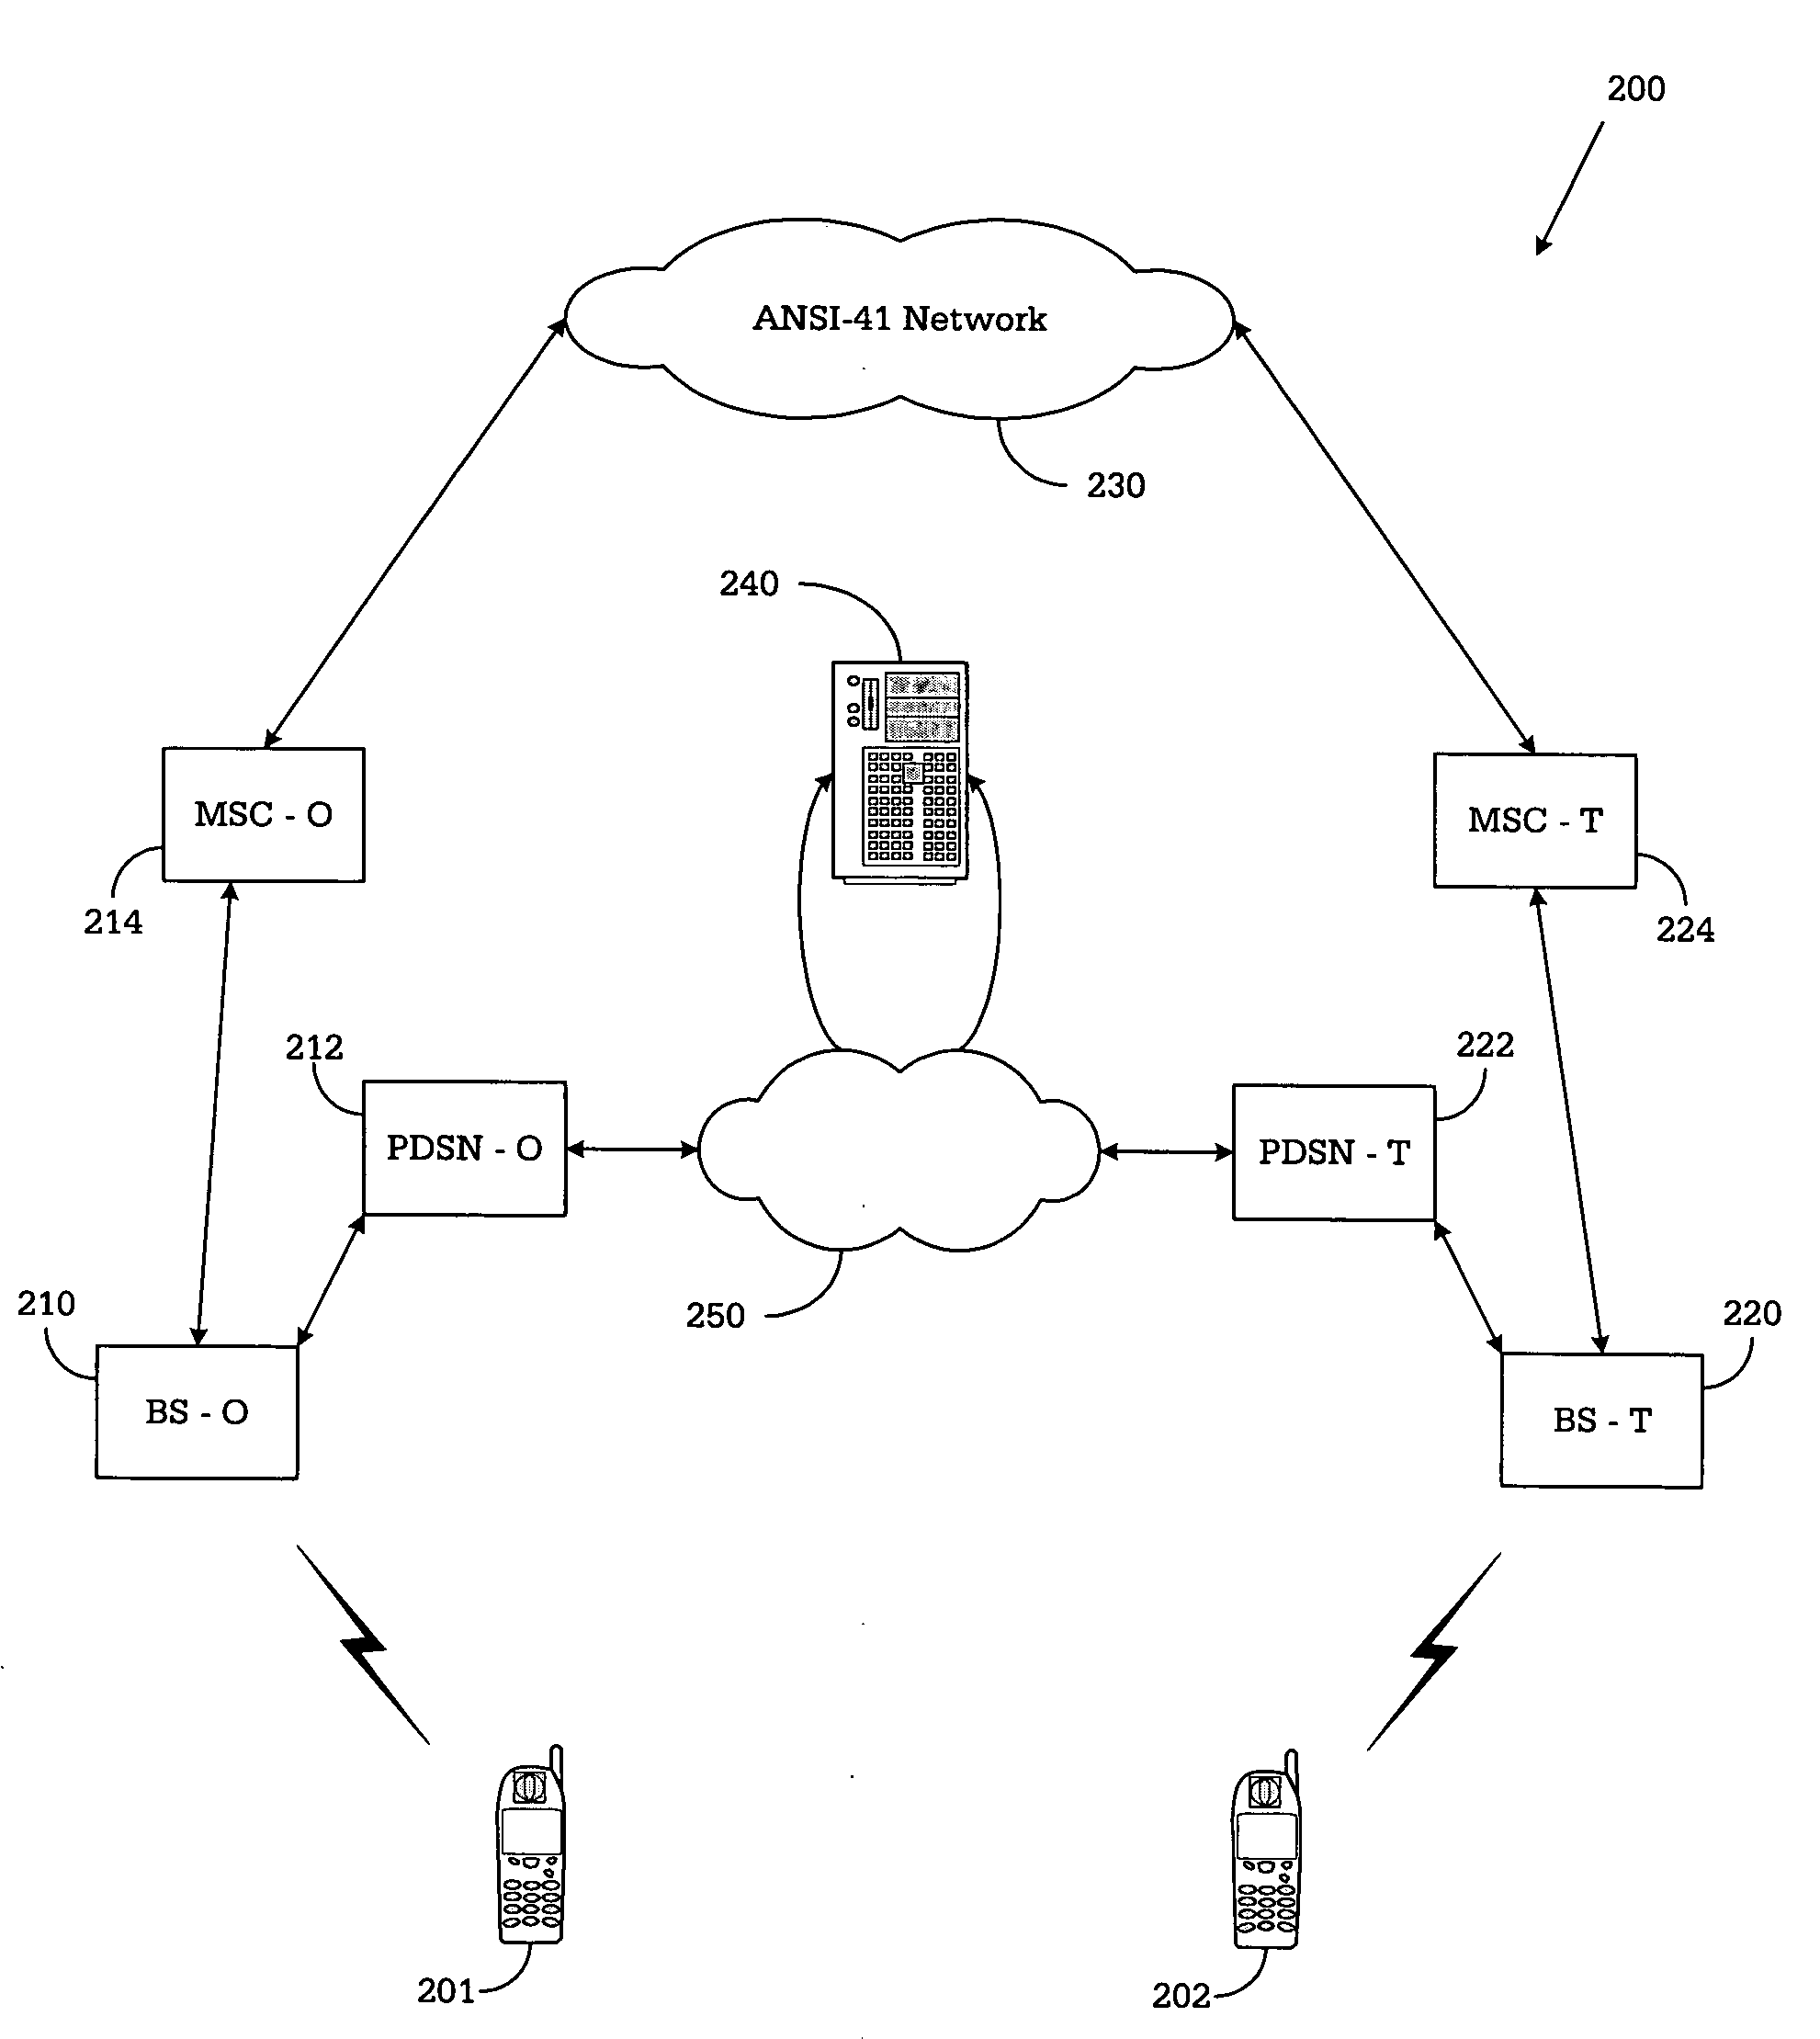 System and method for establishing mobile station-to-mobile station packet data calls between mobile stations in different wireless networks